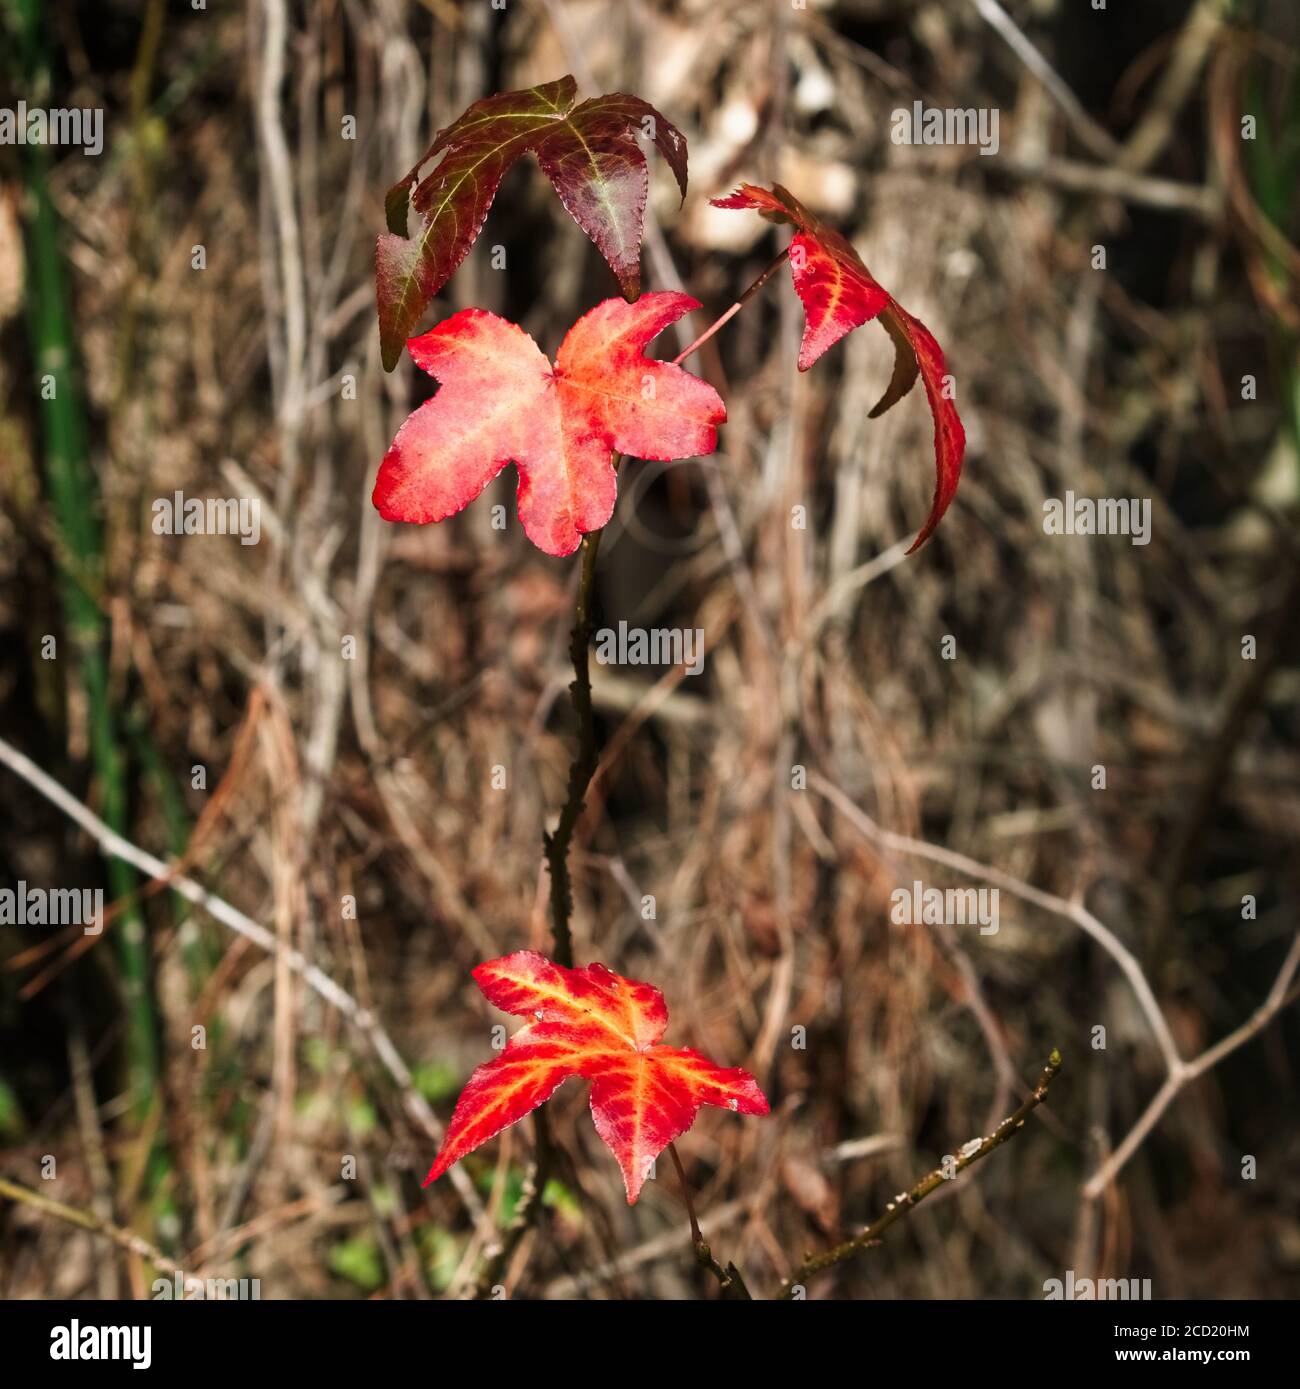 The Woodlands TX USA - 01-20-2020 - Four Fall Red Blätter im Wald Stockfoto